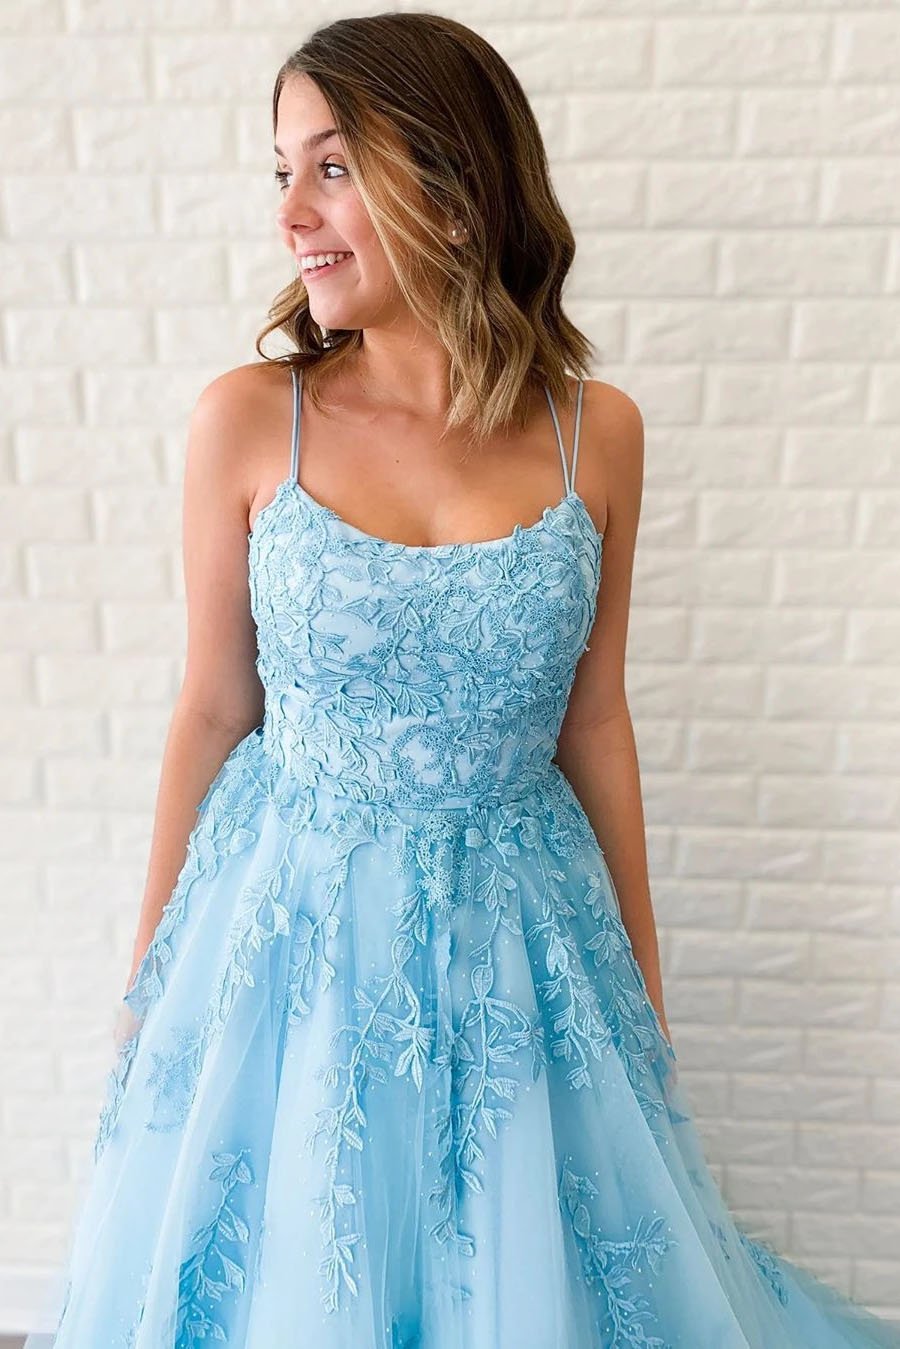 Unique A-Line Sky Blue Tulle Appliques Beads Scoop Prom Dresses with Lace SWK20453